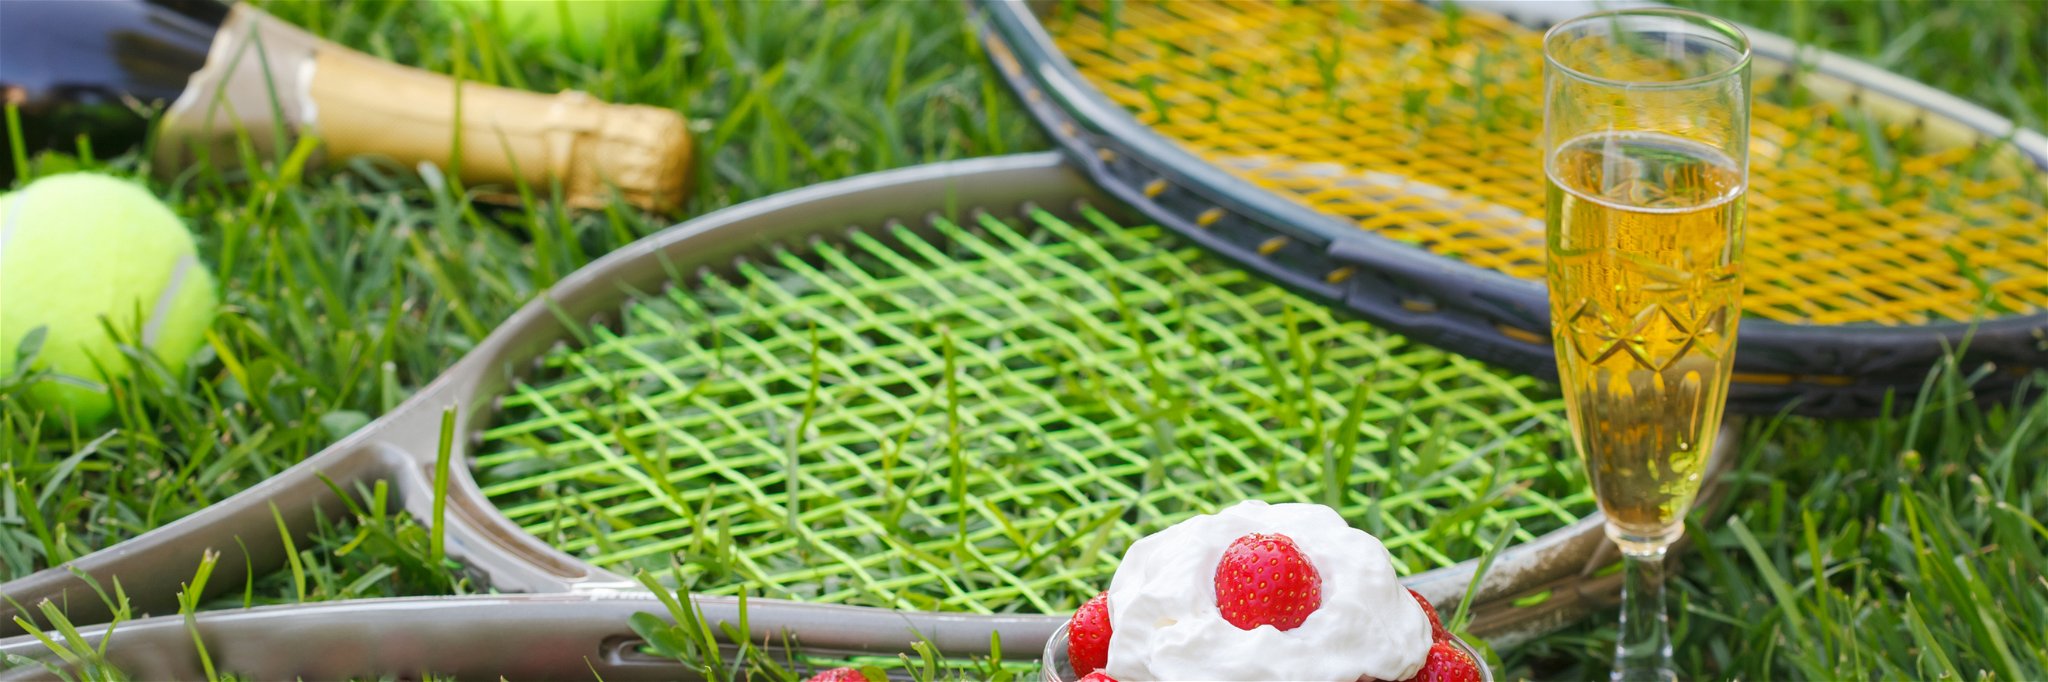 Signature Wimbledon dishes: strawberries and Champagne.